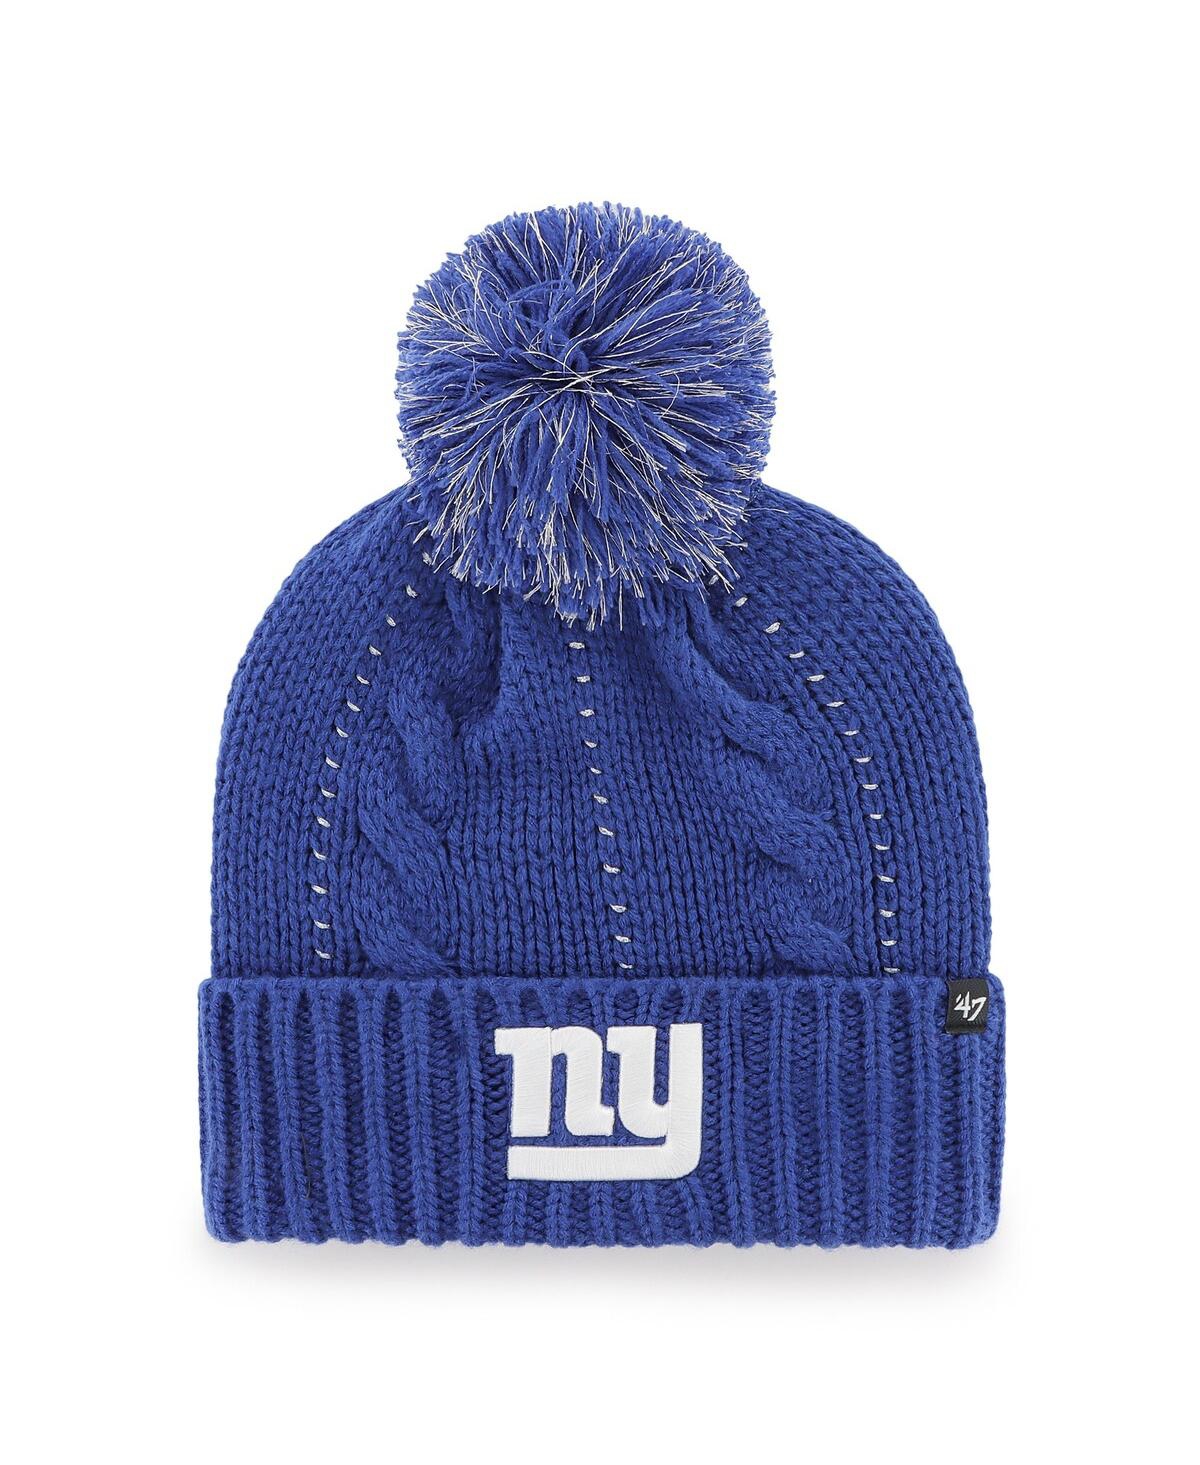 Women's '47 Brand Royal New York Giants Bauble Cuffed Knit Hat with Pom - Royal